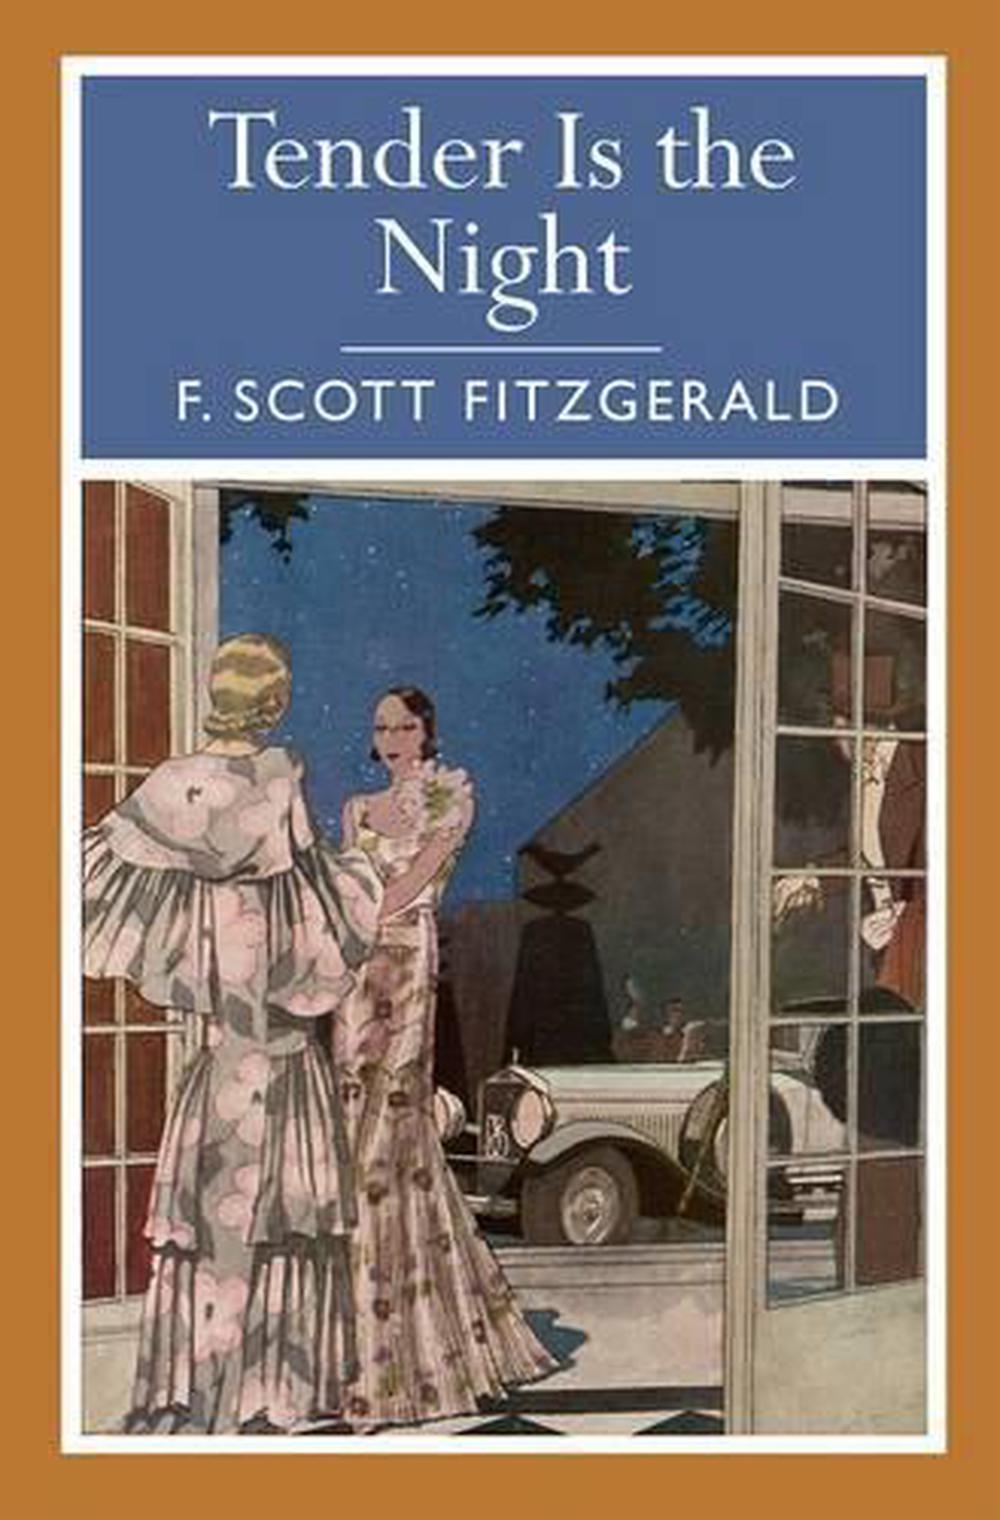 Buy　Paperback,　F.　by　Tender　is　The　9781782124221　Night　at　the　Scott　online　Fitzgerald,　Nile